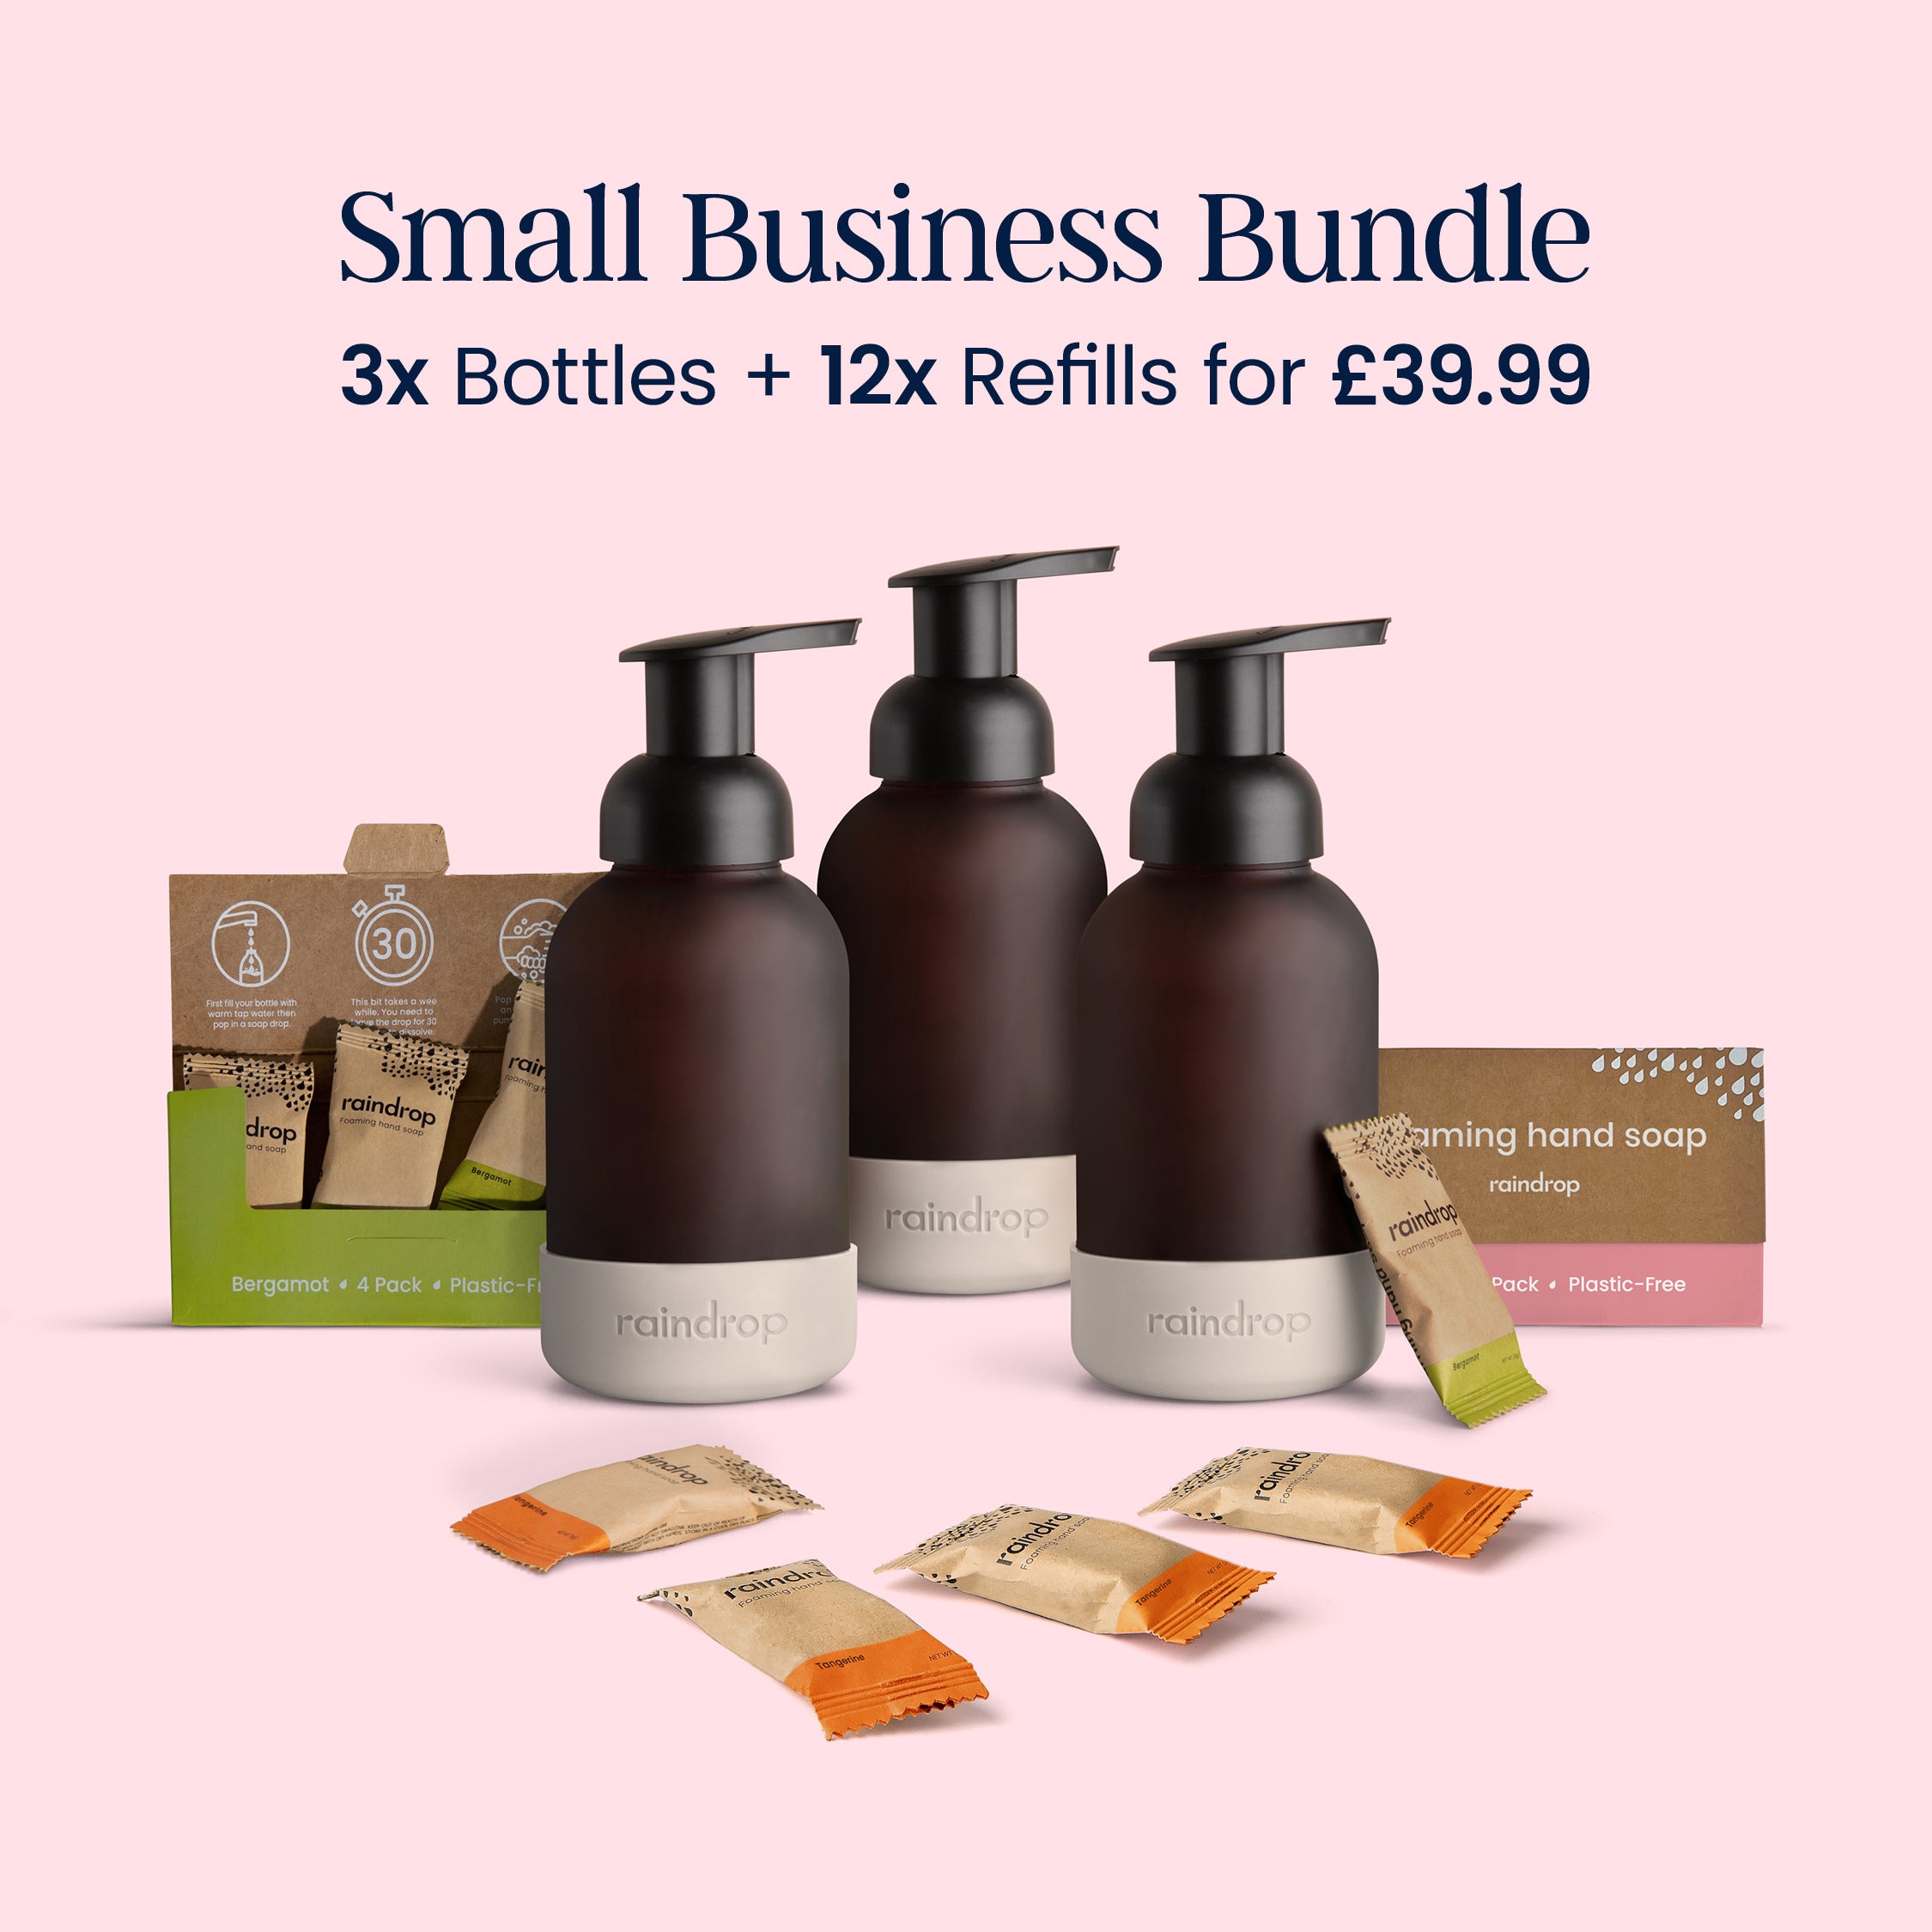 New Small Business Bundle